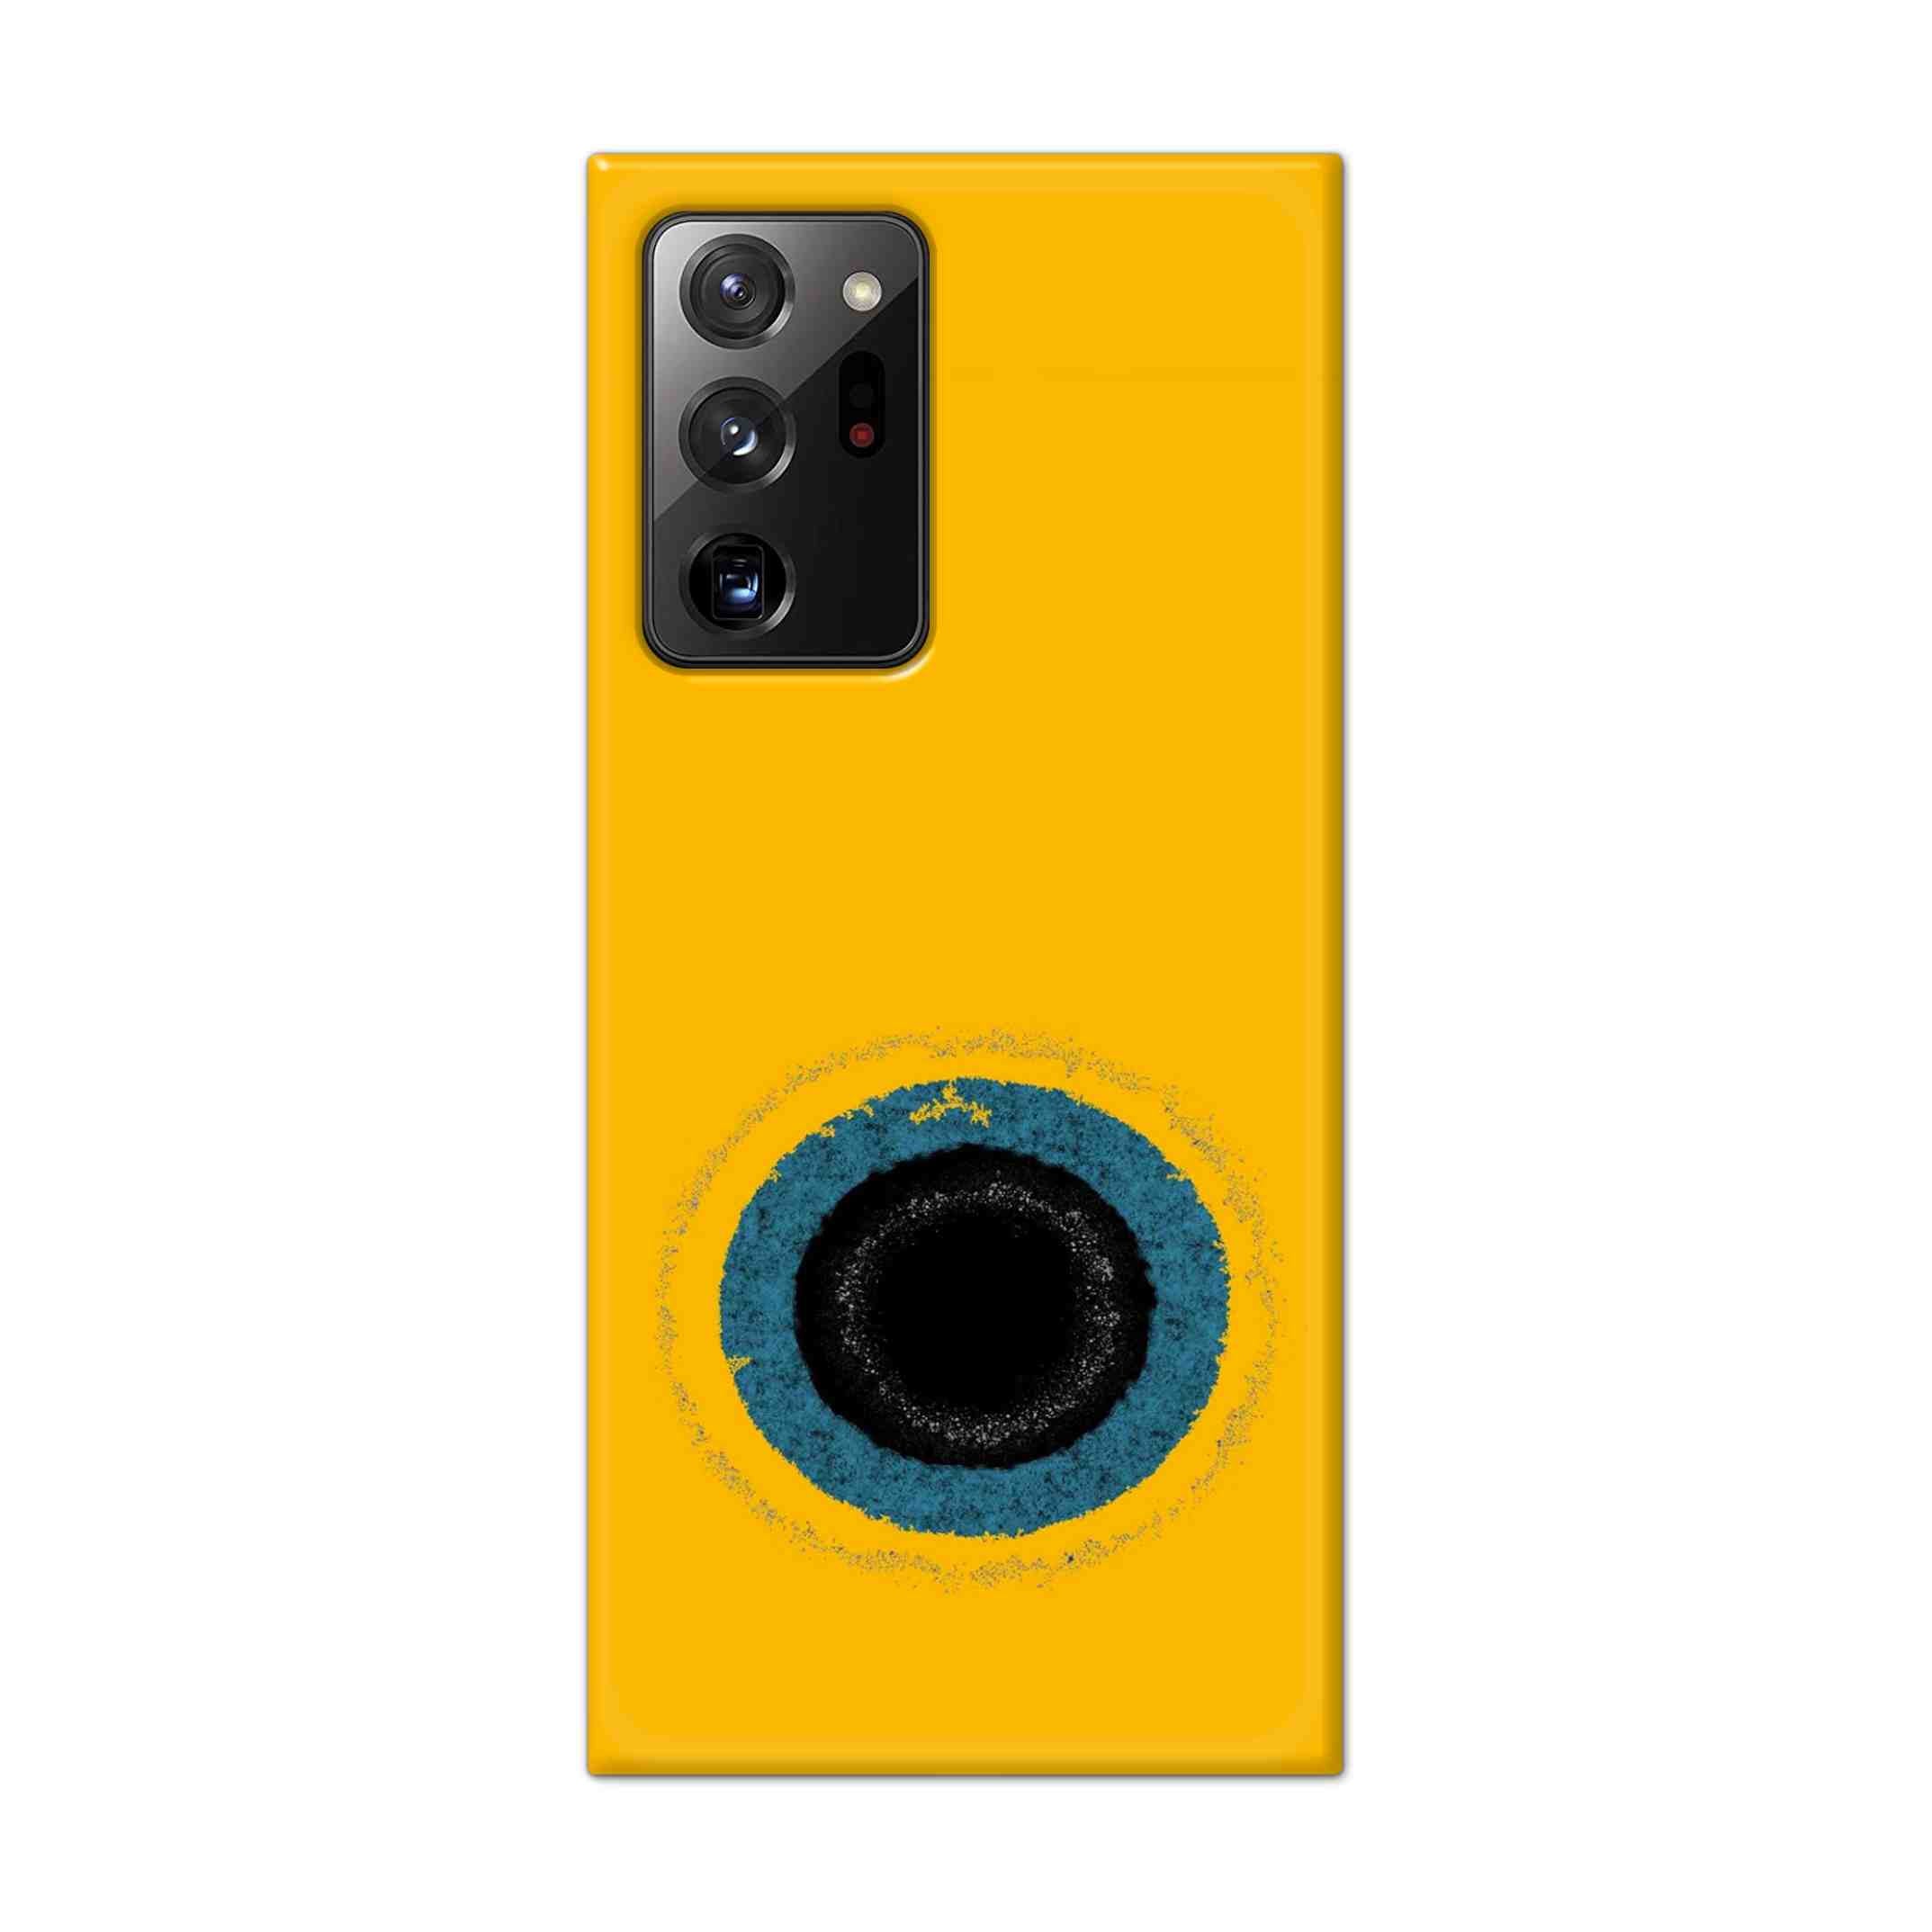 Buy Dark Hole With Yellow Background Hard Back Mobile Phone Case Cover For Samsung Galaxy Note 20 Ultra Online